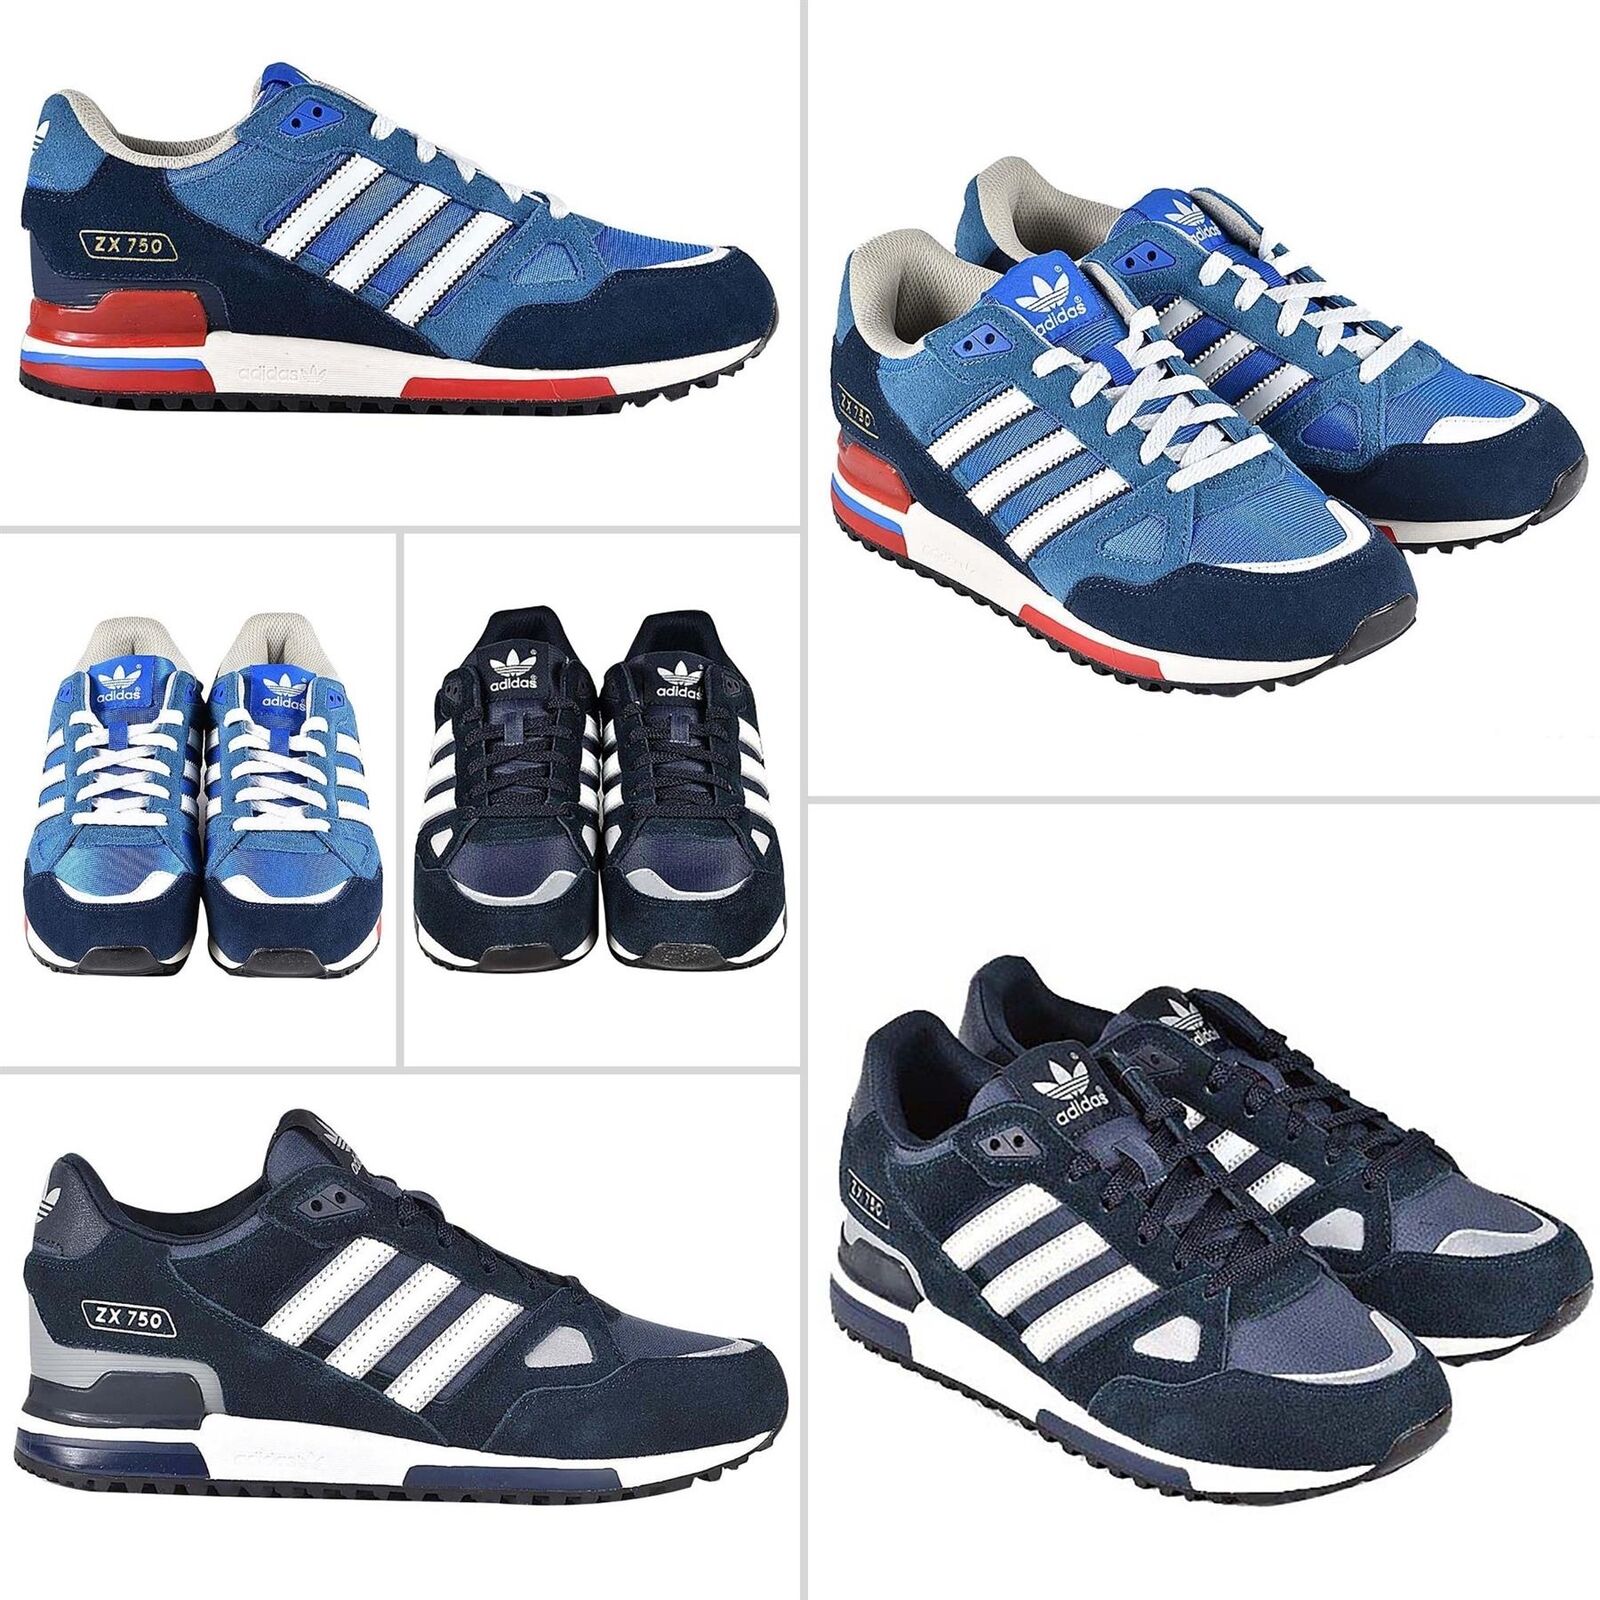 mens adidas zx 750 trainers